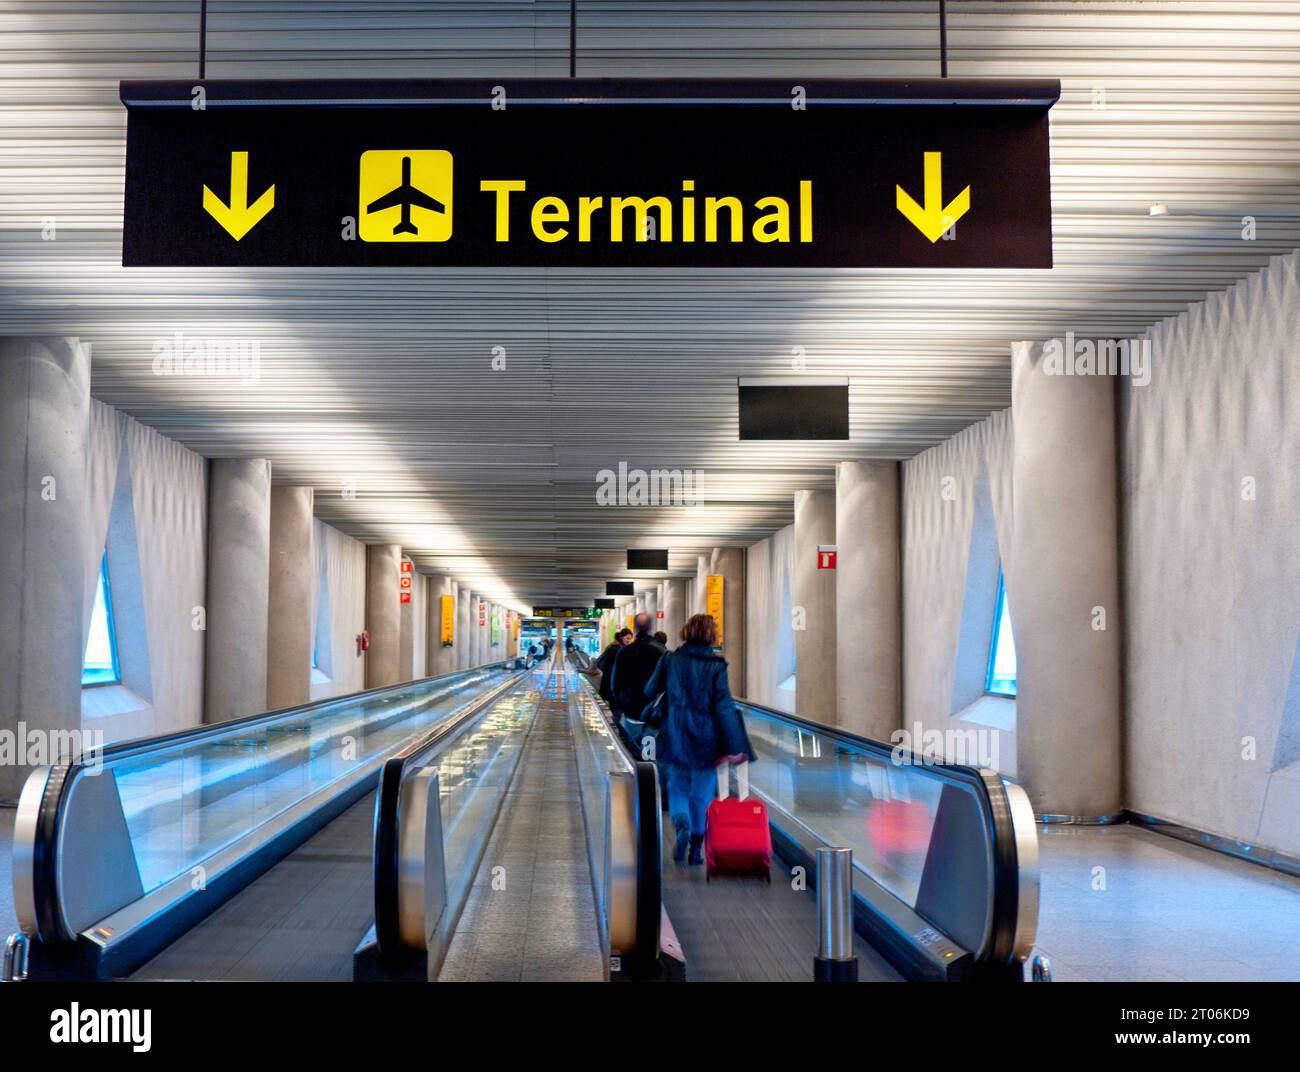 AIRPORT TERMINAL DEPARTURES ENTRANCE SIGN BOARD  Airline passengers moving walkway into modern contemporary airport terminal. Palma Spain Mallorca Stock Photo